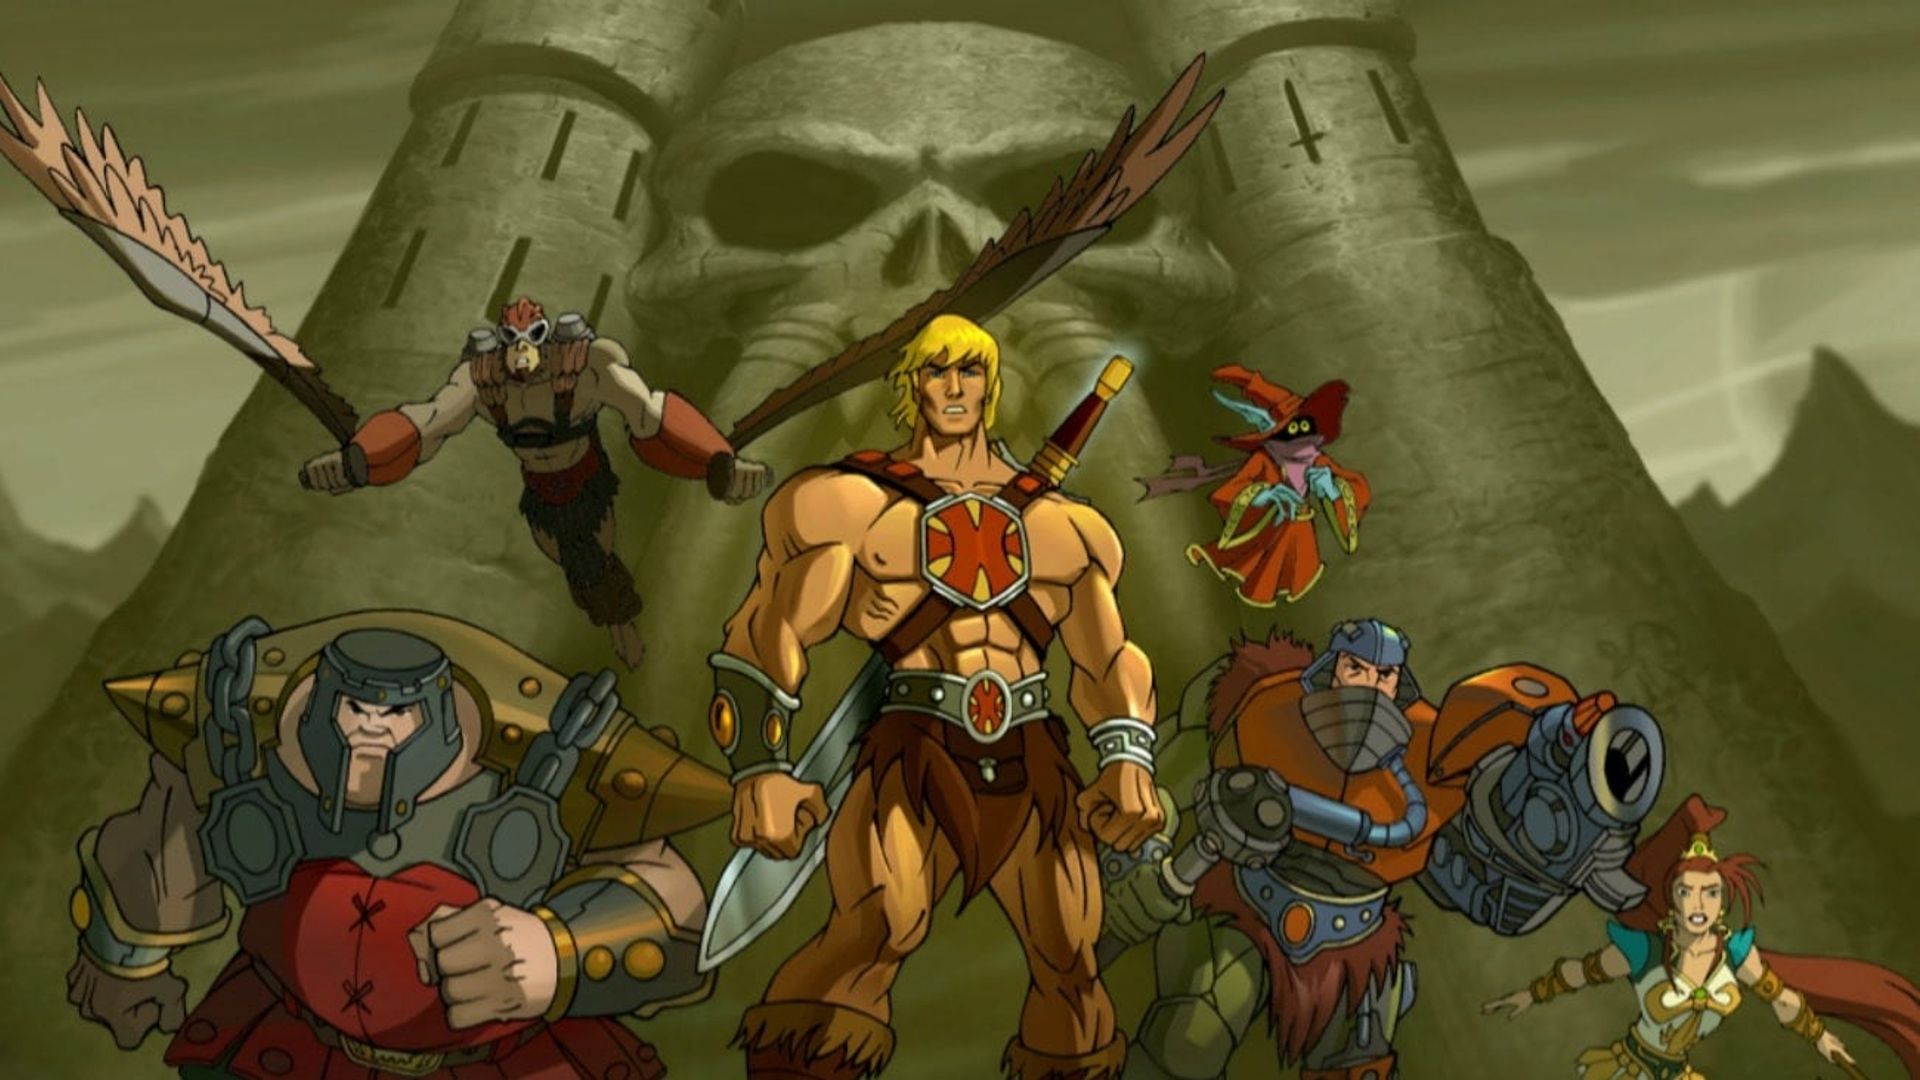 He-Man and the Masters of the Universe background